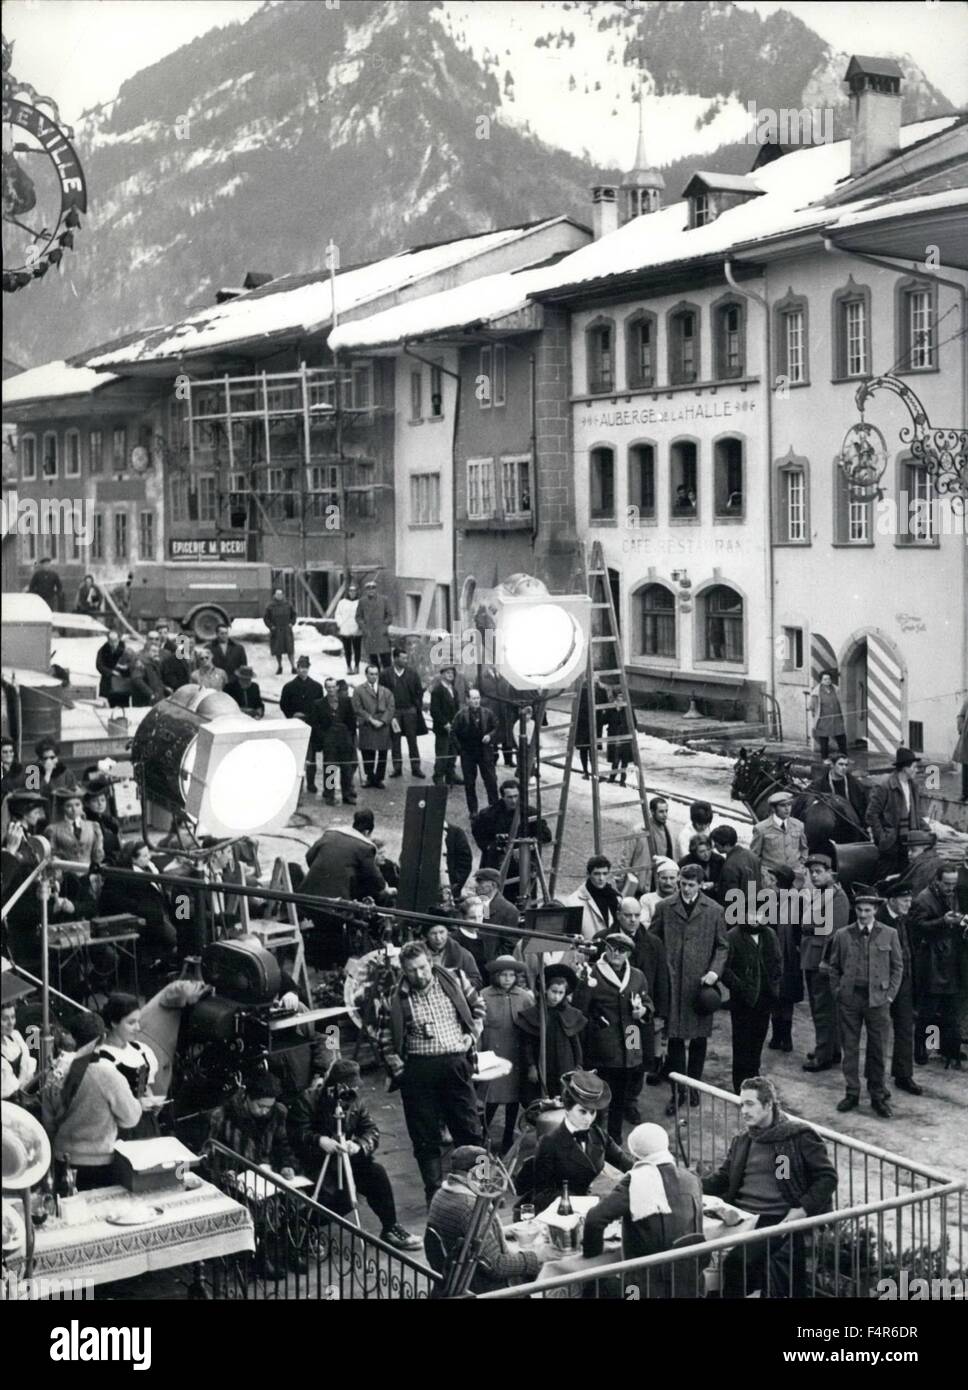 1955 - ''Lady L'' the new film being produced in Gruyere, Switzerland.: The film ''Lady L'' is now being produced in the romantic atmosphere and medieval scenery of the little Swiss town, Gruyere. The principal roles are played by Sophia Loren, Paul Newman, David Niven and Peter Ustinov. © Keystone Pictures USA/ZUMAPRESS.com/Alamy Live News Stock Photo